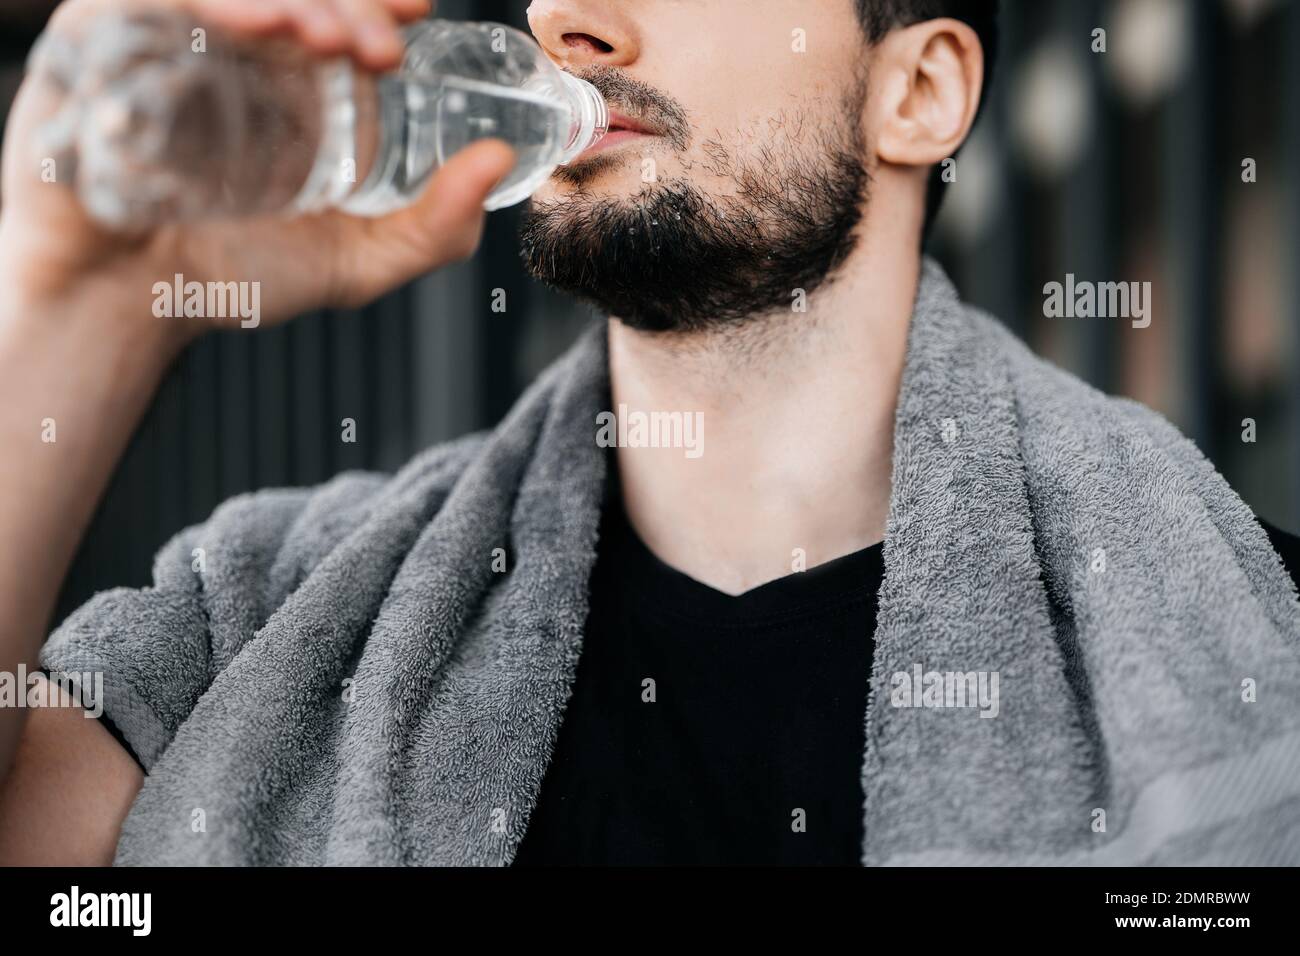 https://c8.alamy.com/comp/2DMRBWW/man-drinking-water-from-plastic-bottle-after-hard-workout-close-up-cut-view-of-male-face-dont-forget-to-drink-during-training-take-care-of-youself-2DMRBWW.jpg